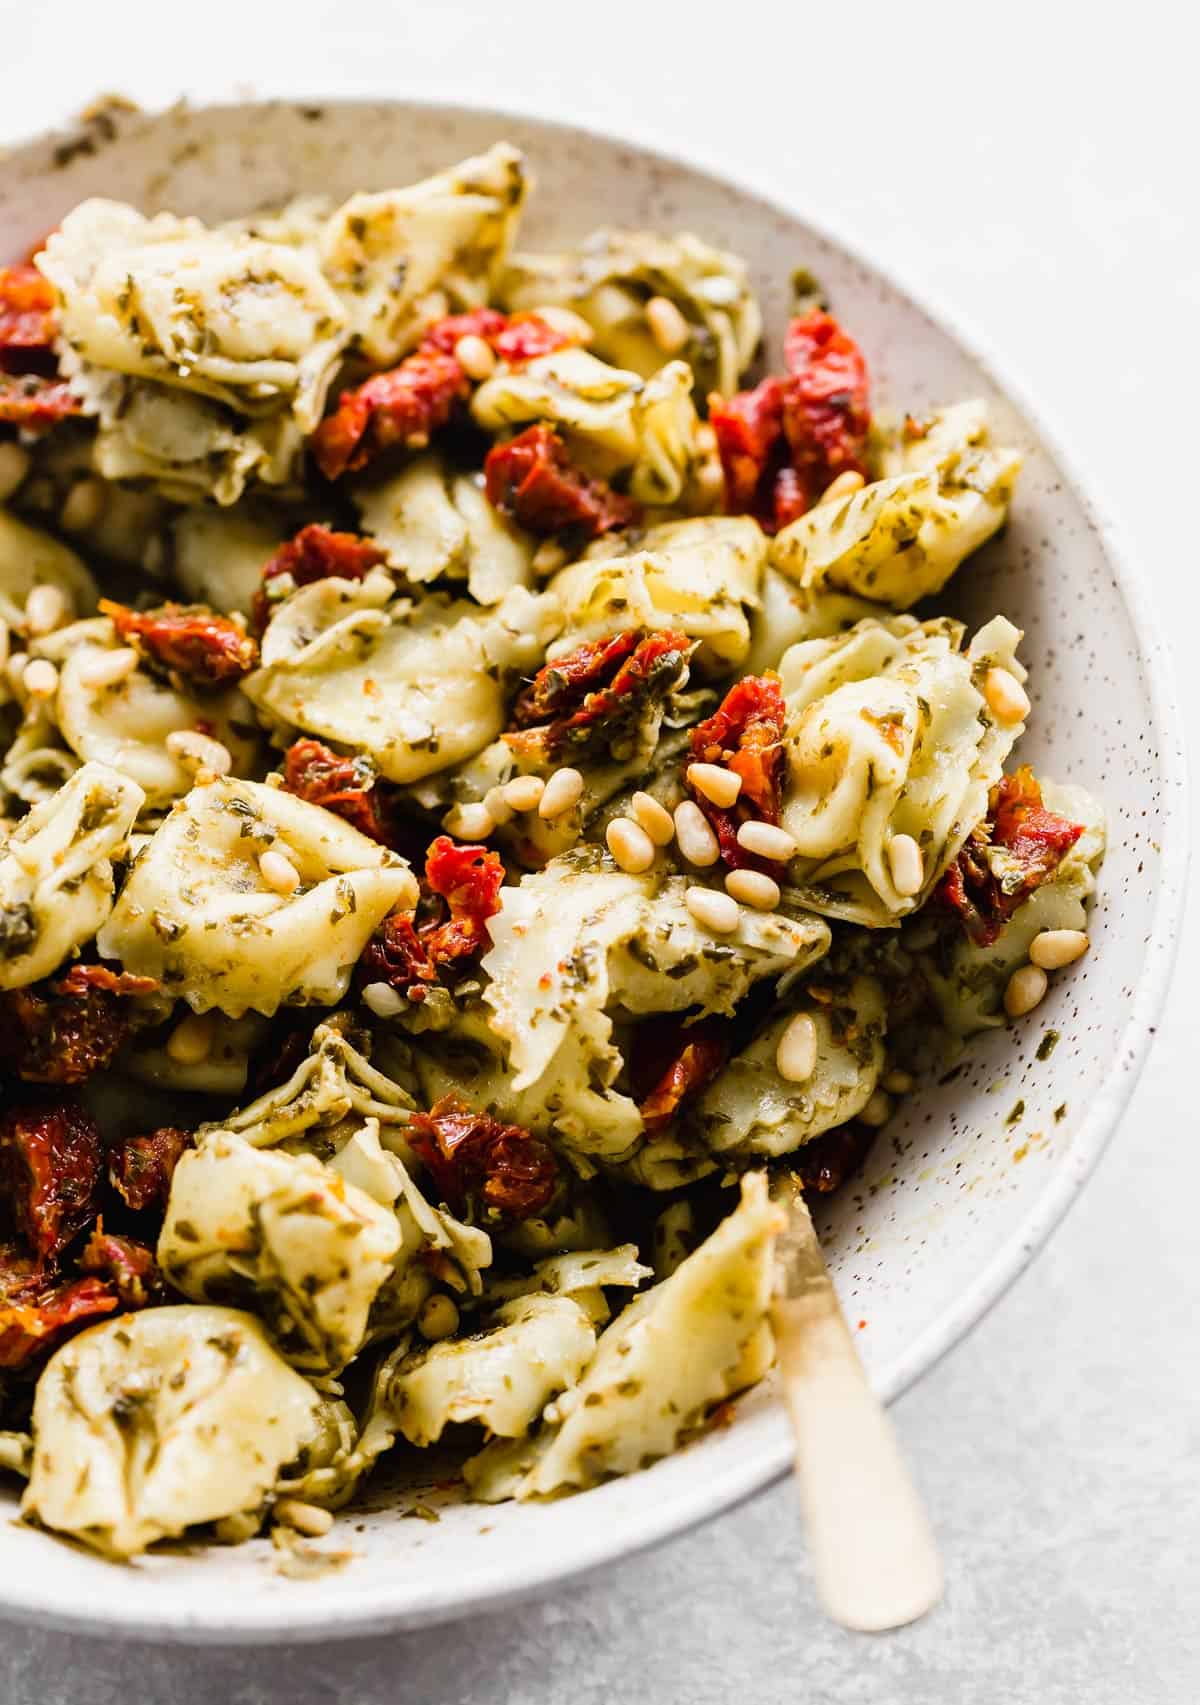 A close up photo of Pesto Tortellini Pasta Salad with sun-dried tomatoes and pine nuts in the salad. 